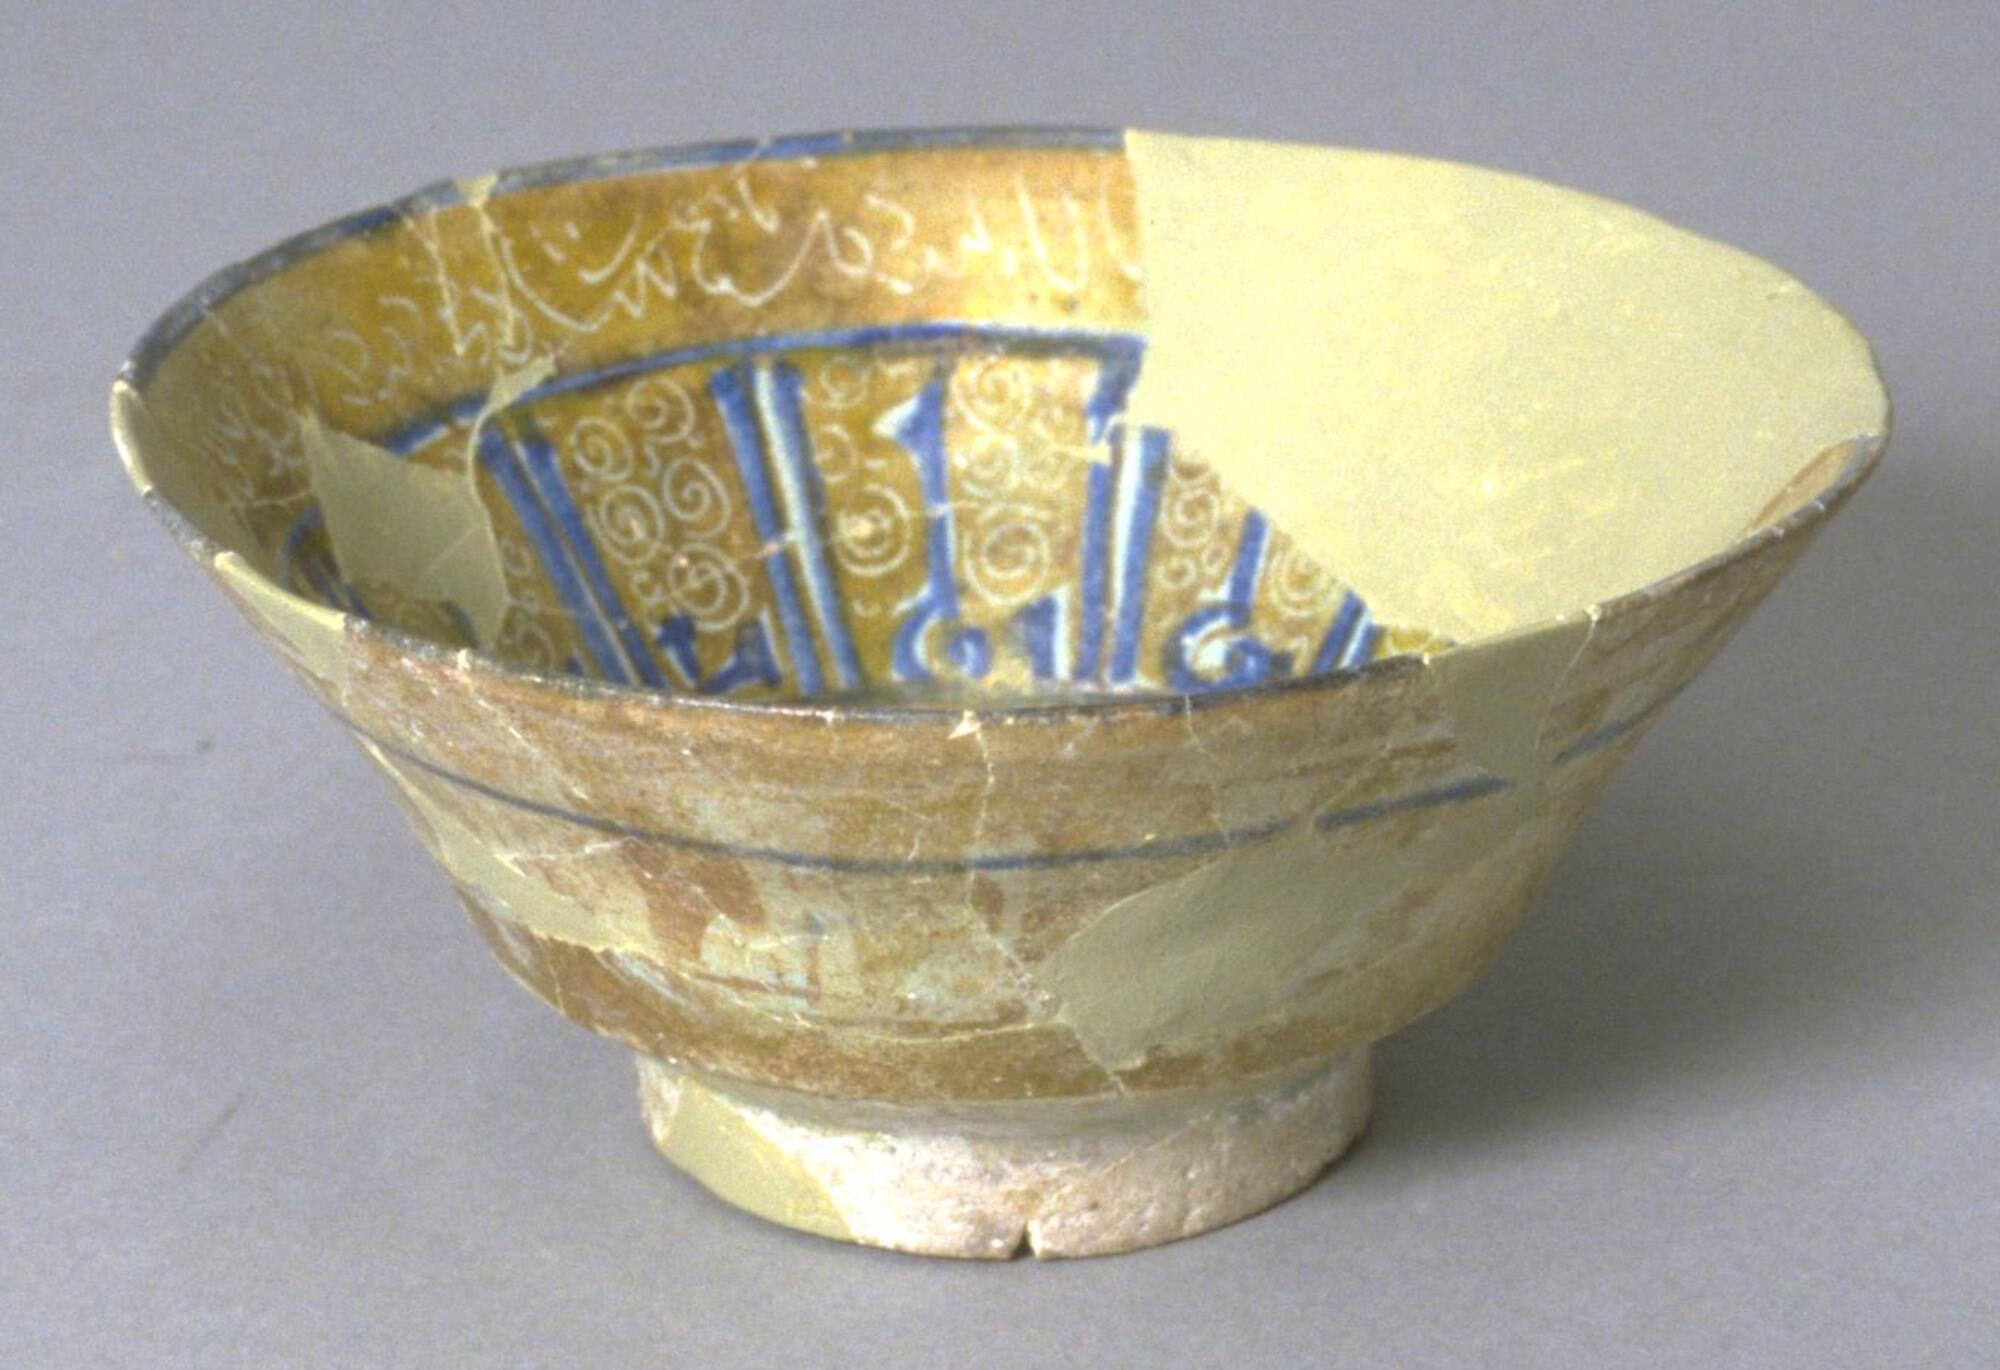 This <em>Kashan</em> style bowl has flaring walls and is made with opaque turquoise glaze, yellow-brown lustre painting and blue overglaze painting. The bowl contains Kufic inscription in cobalt which encircle the interior, with white inscriptions around the rim and center. A bird motif decorates the interior base.  On the outside, we find white Kufic inscriptions under a blue cobalt line encircling the upper part of the bowl.<br />
 